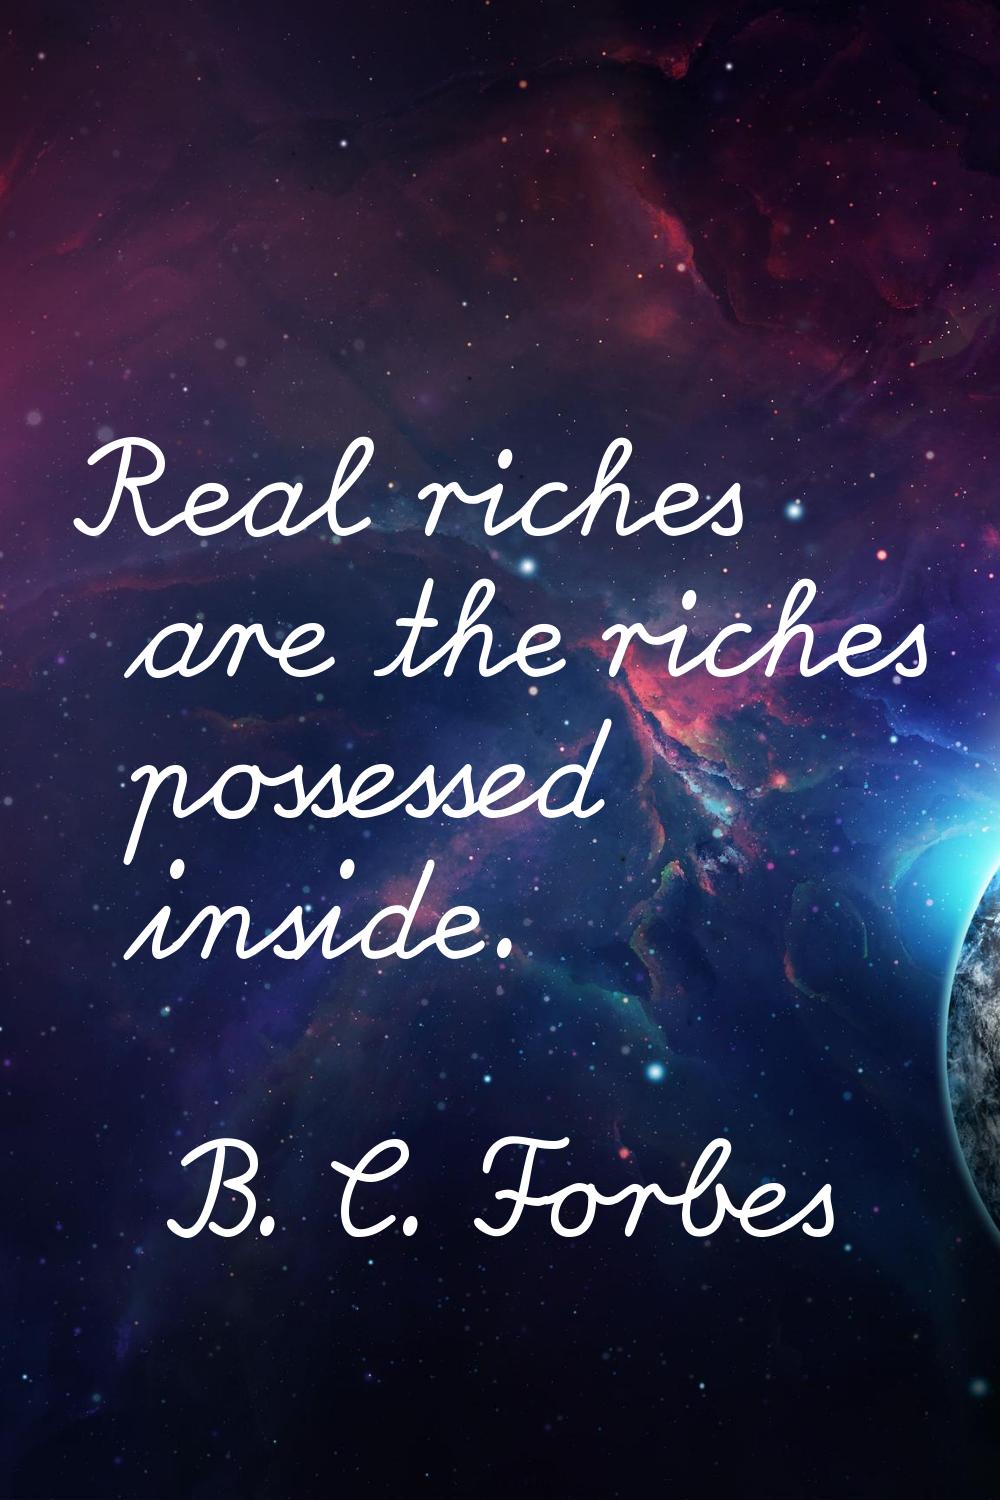 Real riches are the riches possessed inside.